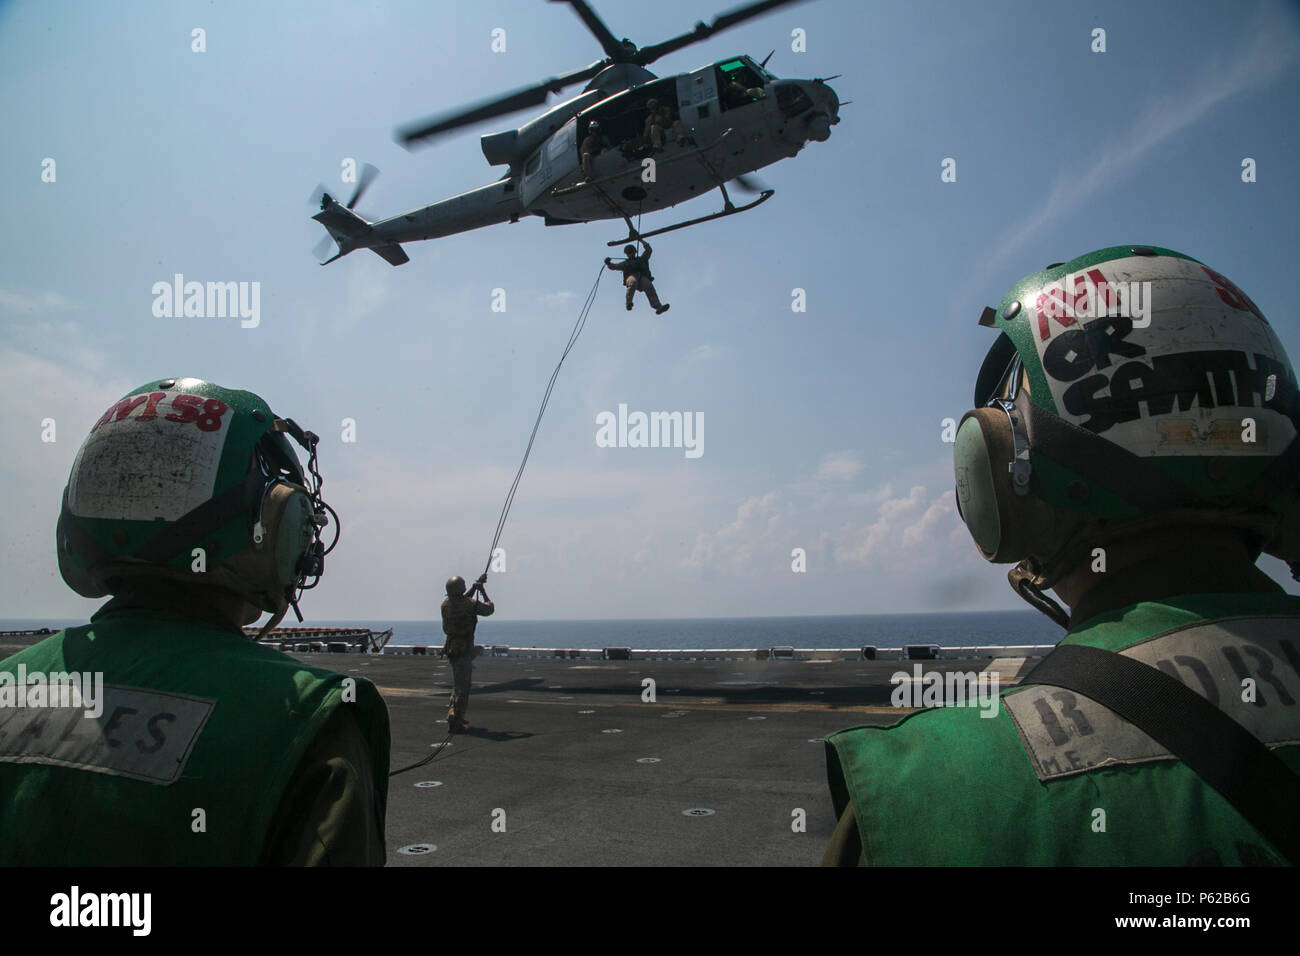 AT SEA (April 1, 2016)-U.S. Marines with the 13th Marine Expeditionary Unit, conduct rappel training, April 1, 2016, during the MEU's western pacific deployment aboard the USS Boxer. More then 4,500 Marines and Sailors from the Boxer ARG, 13th MEU team are currently transiting the Pacific Ocean toward the U.S. 5th fleet area of operations during a scheduled deployment. (U.S. Marine Corps photo by Sgt. Briauna Birl/RELEASED) Stock Photo